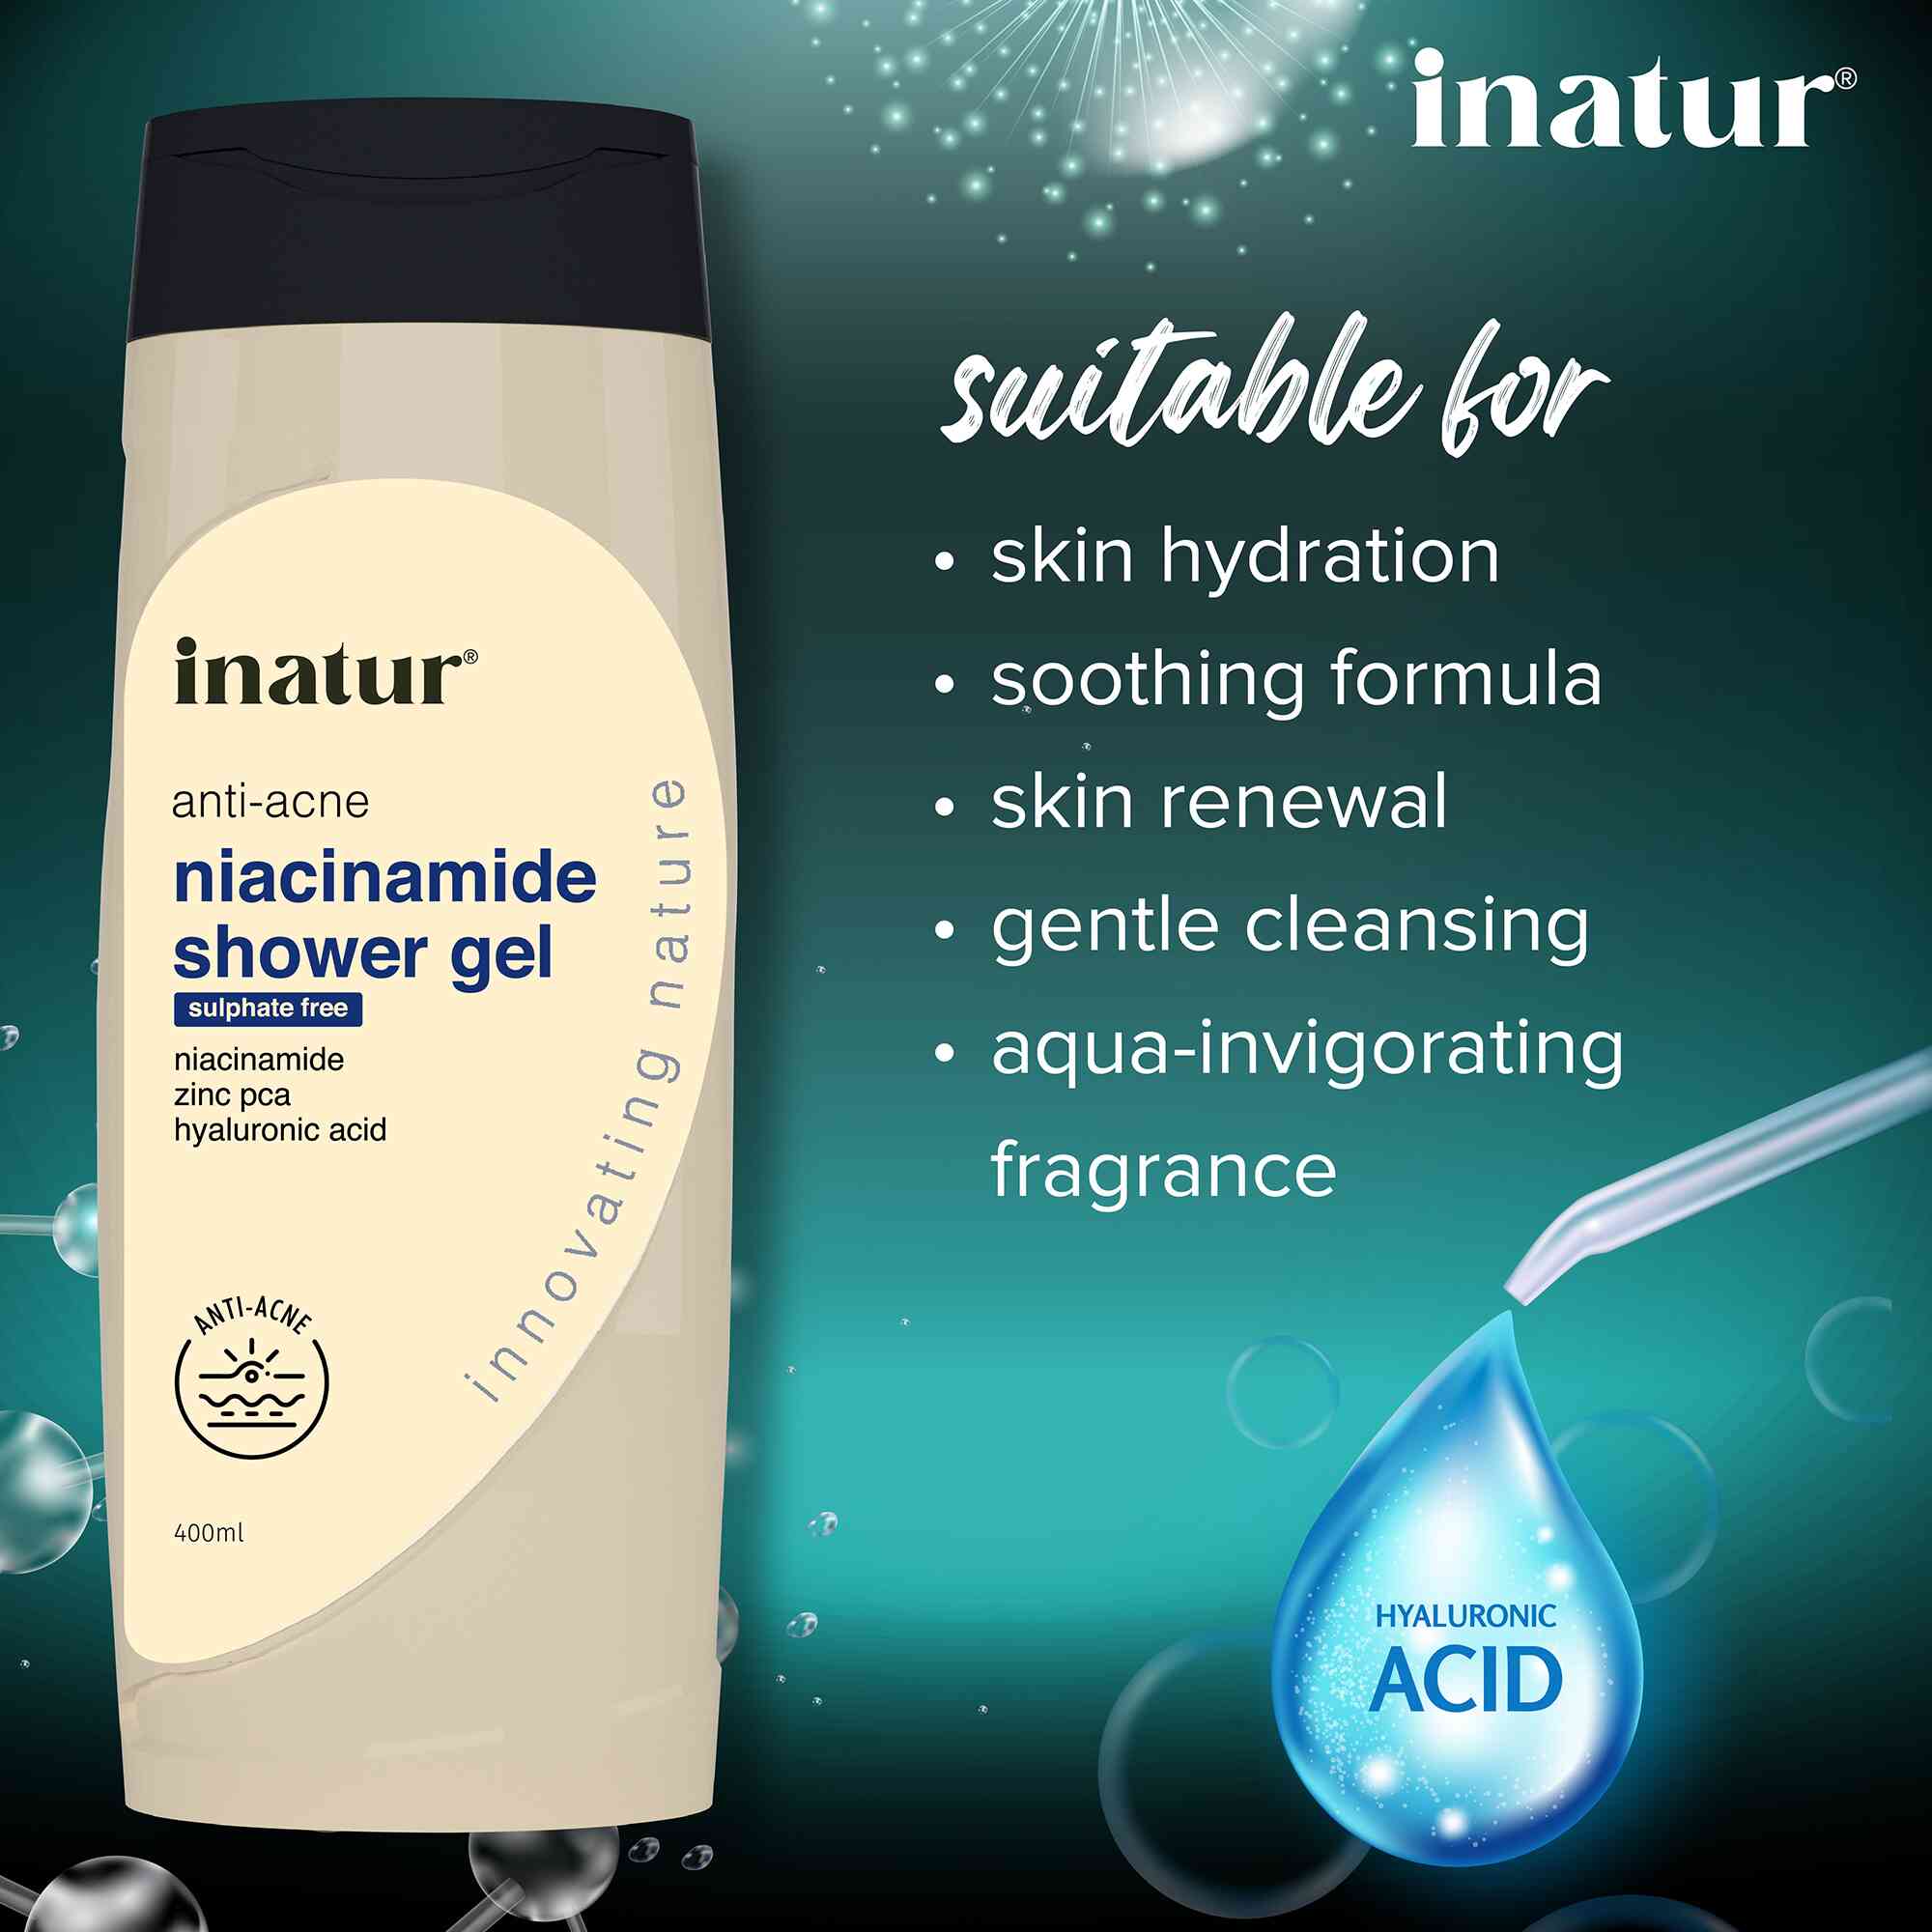 inatur niacinamide shower gel is suitable for